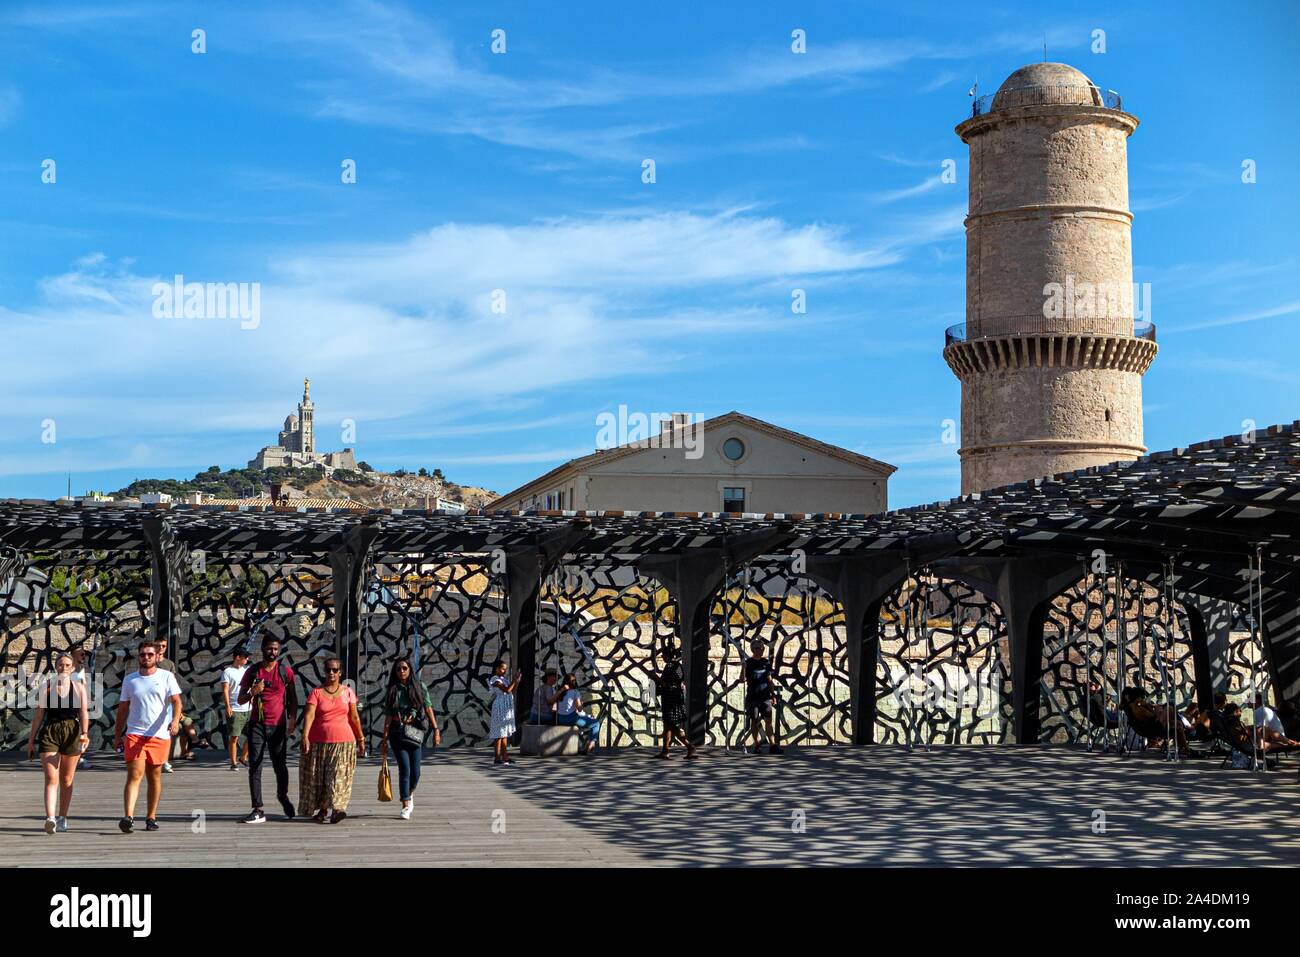 VISITORS AT THE MUCEM, MUSEUM OF THE CIVILIZATIONS OF EUROPE AND THE MEDITERRANEAN, THE THE TOWER OF THE FORT SAINT-JEAN AND THE NOTRE-DAME DE LA GARDE BASILICA, MARSEILLE, BOUCHES-DU RHONE, FRANCE Stock Photo